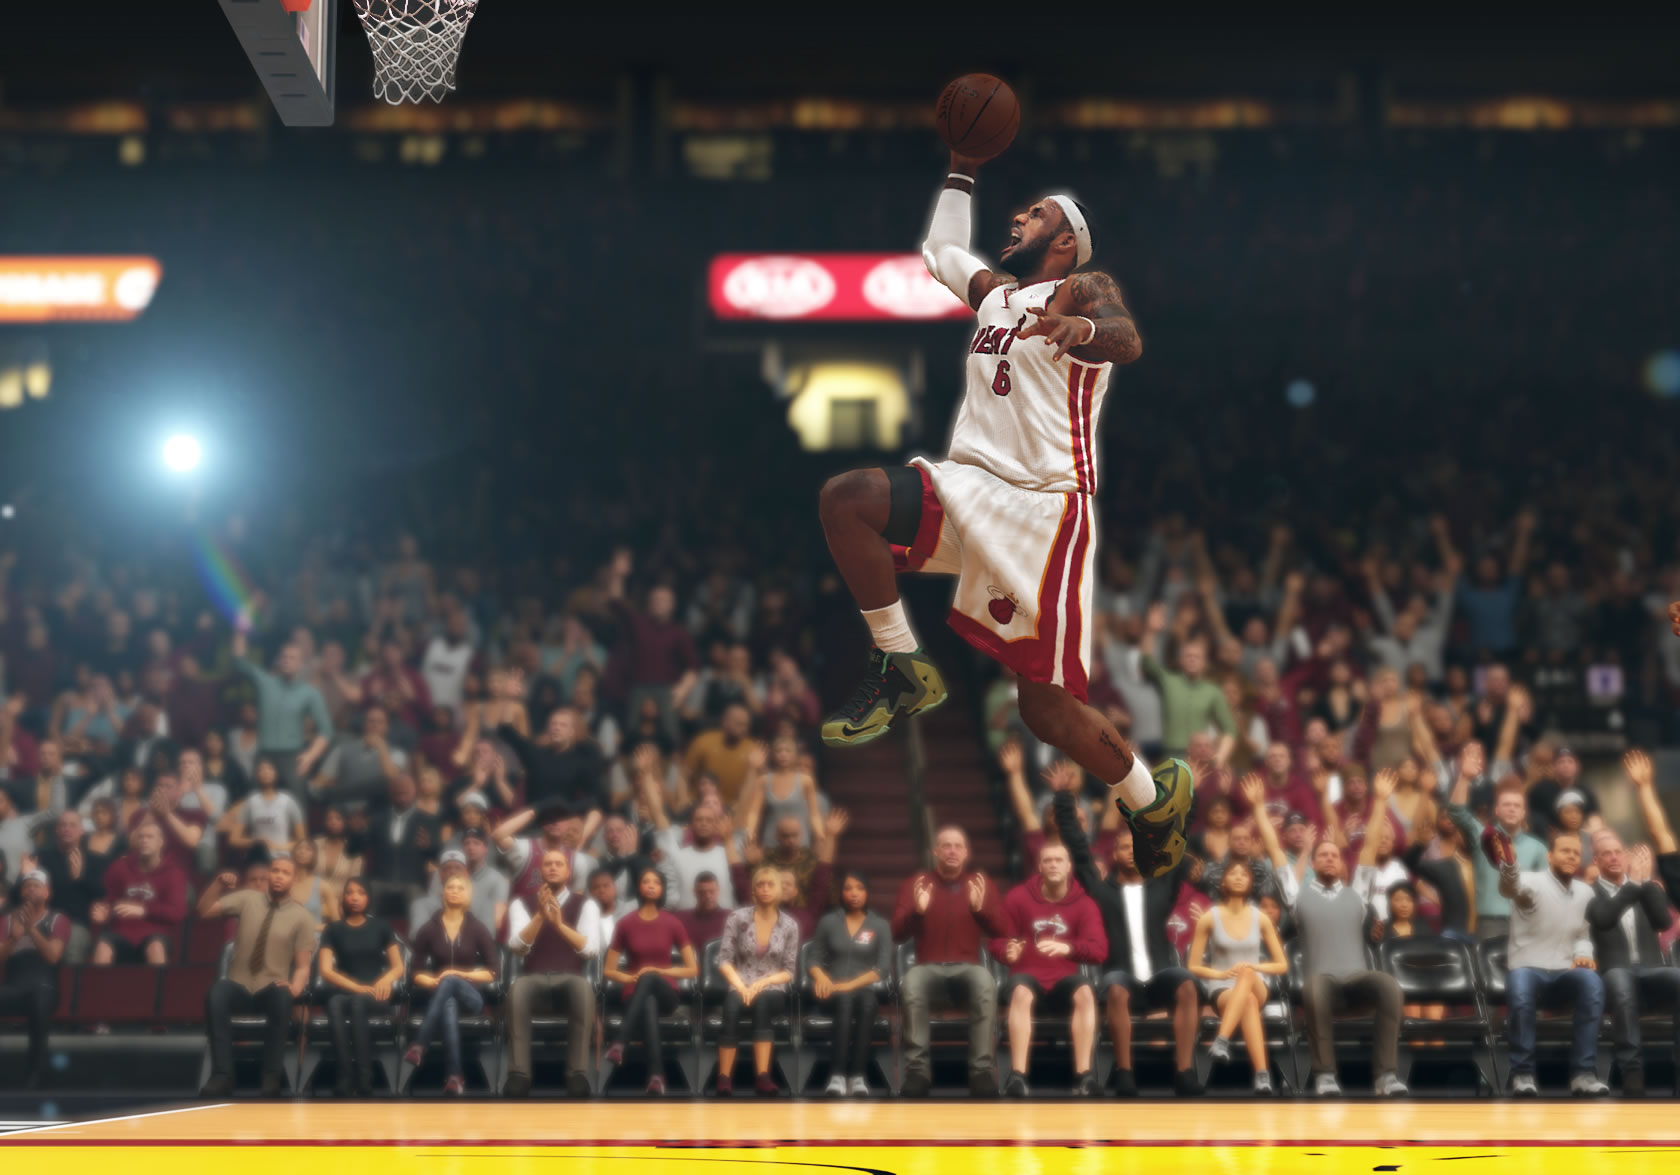 kyrie irving shooting form 2k14